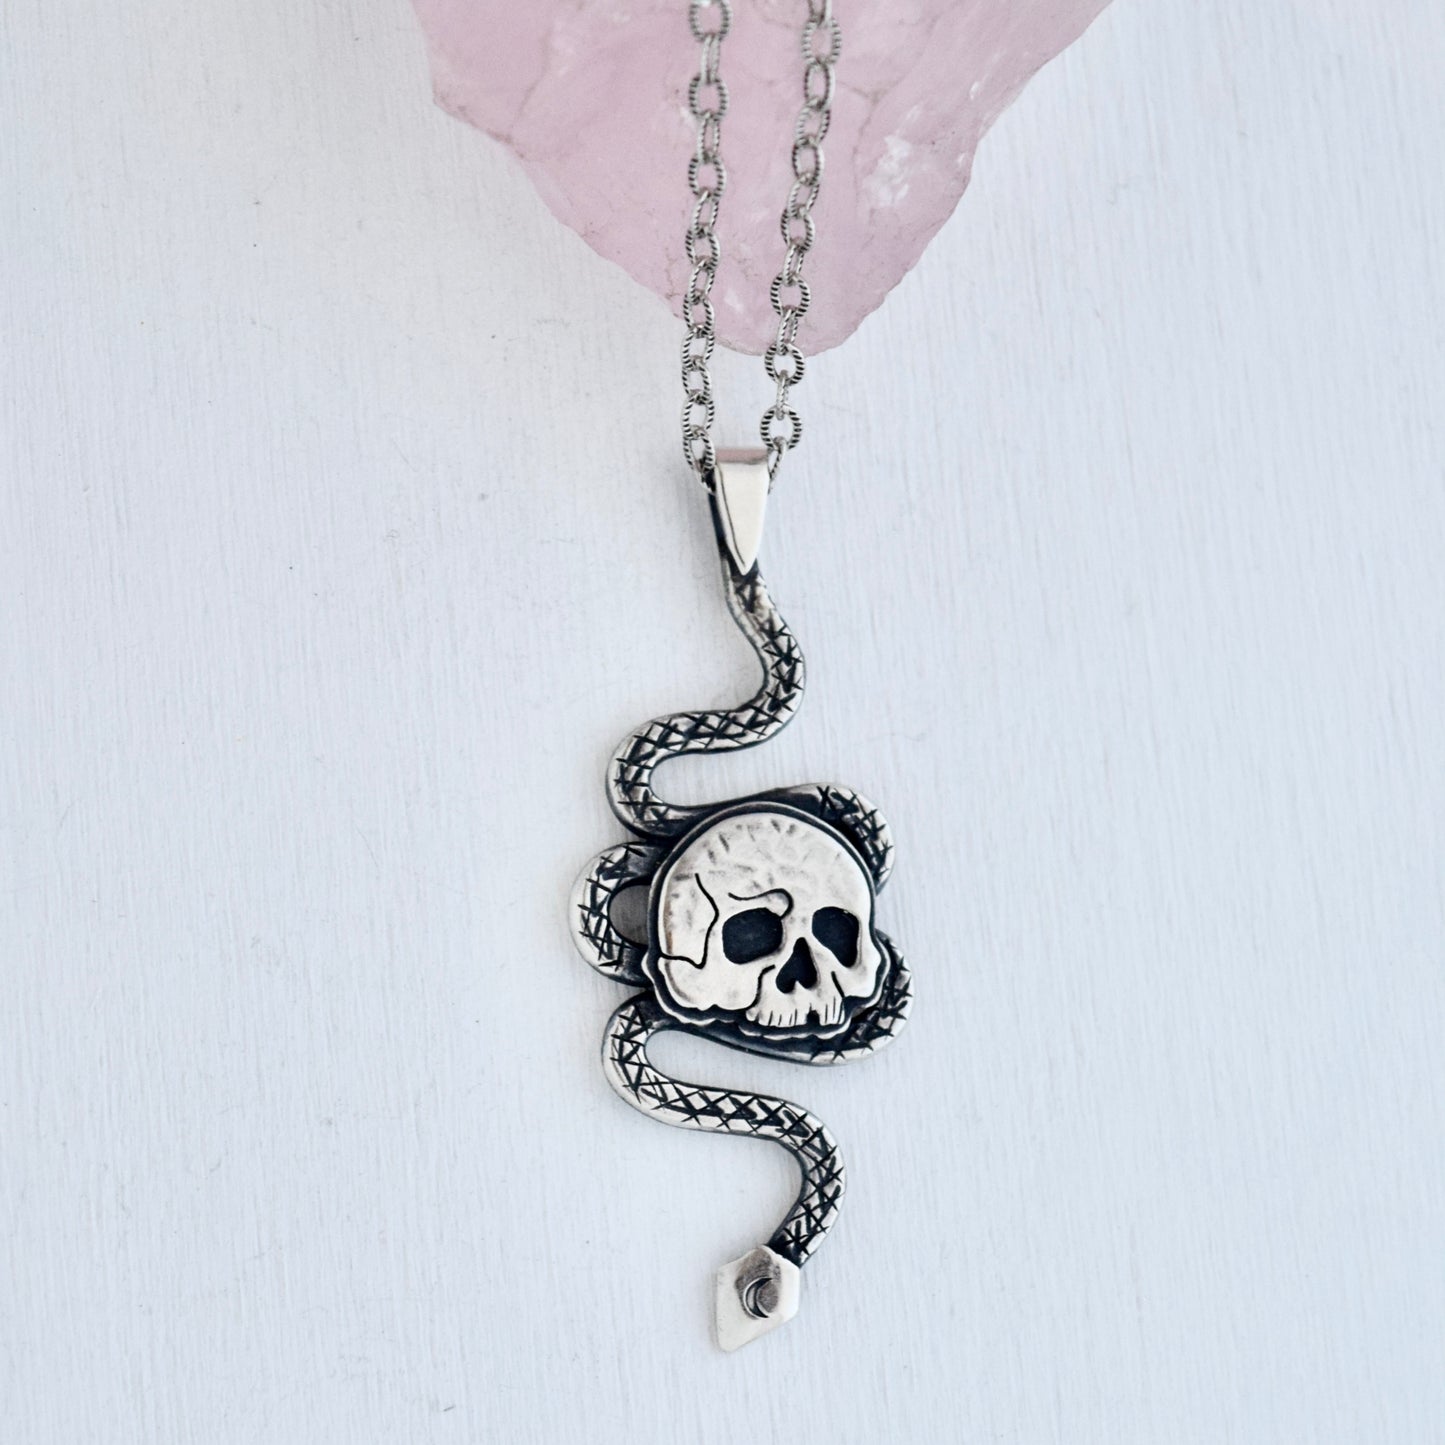 Serpent and Skull Necklace #003